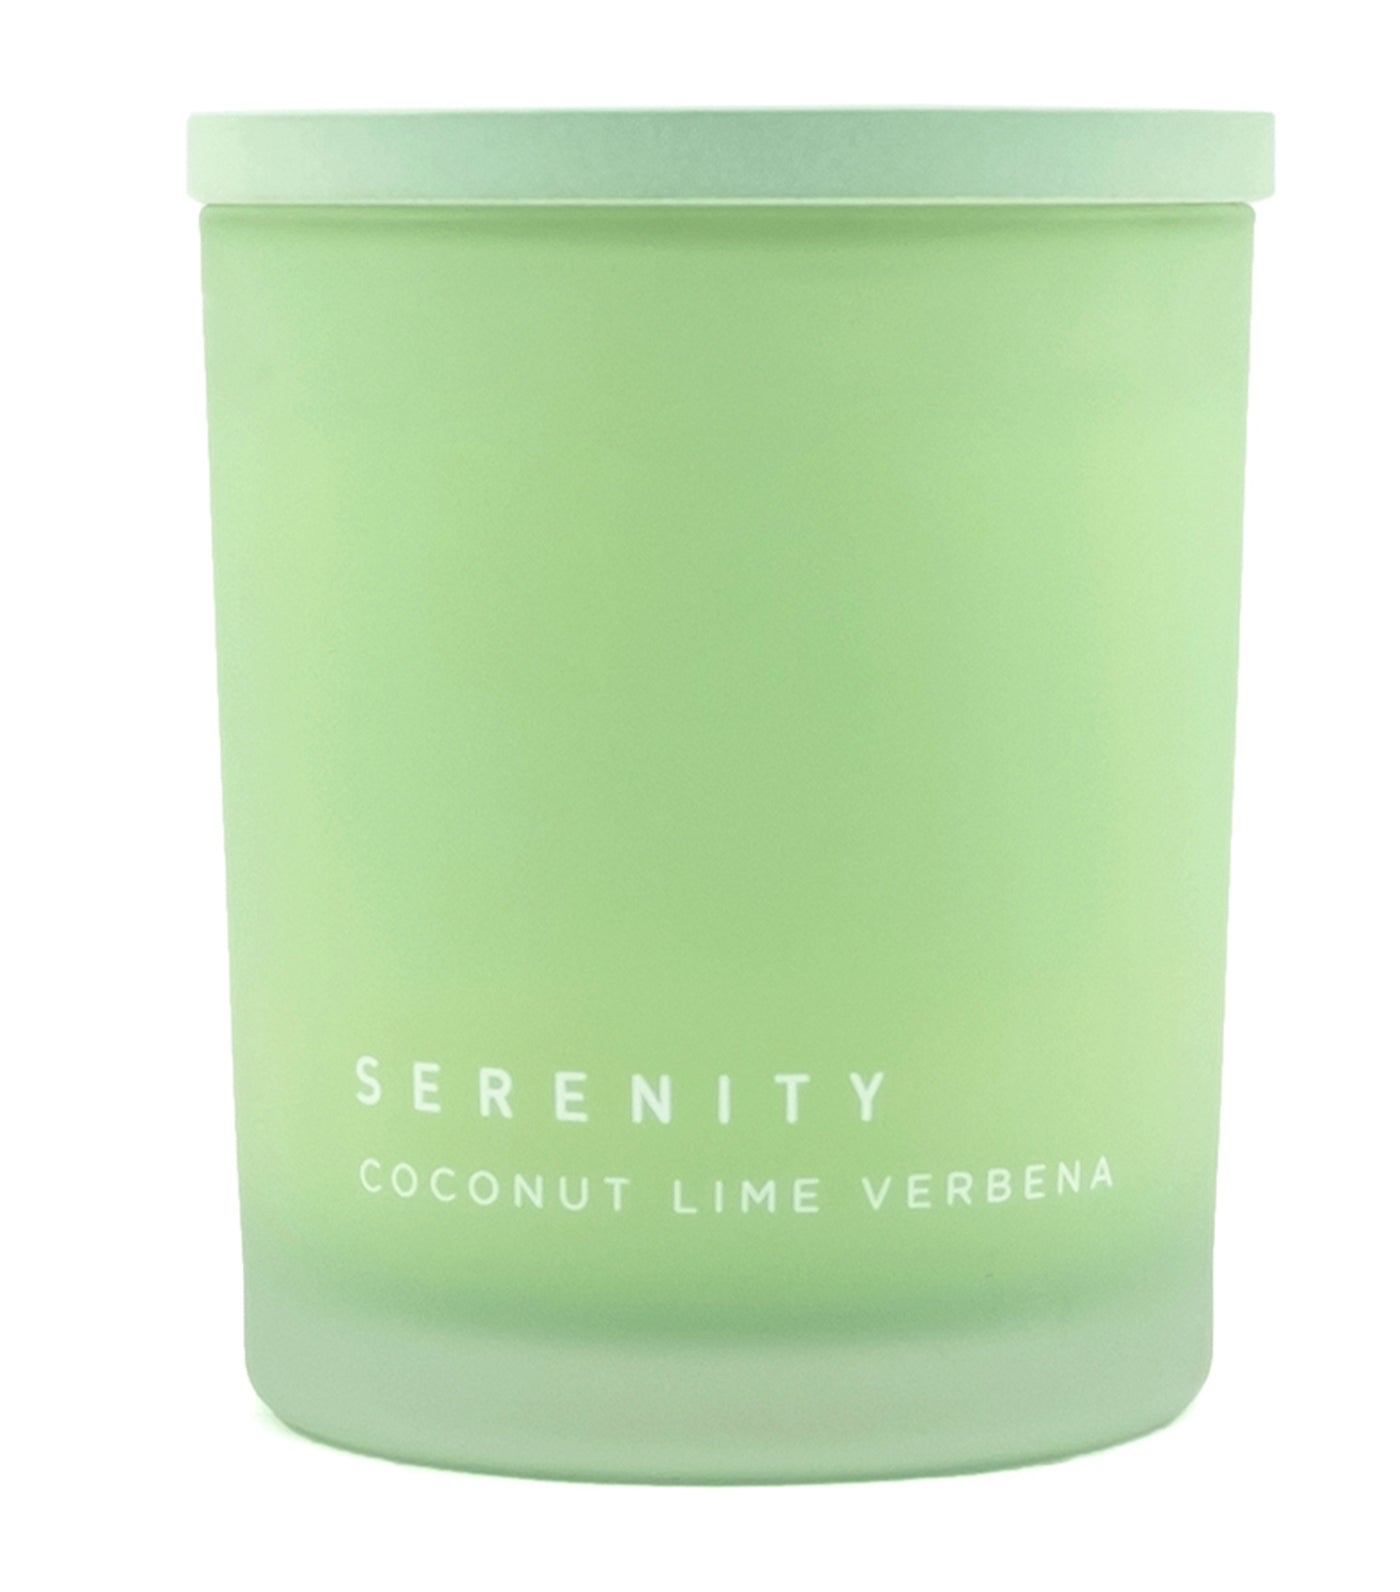 serenity coconut lime verbena soy wax candle